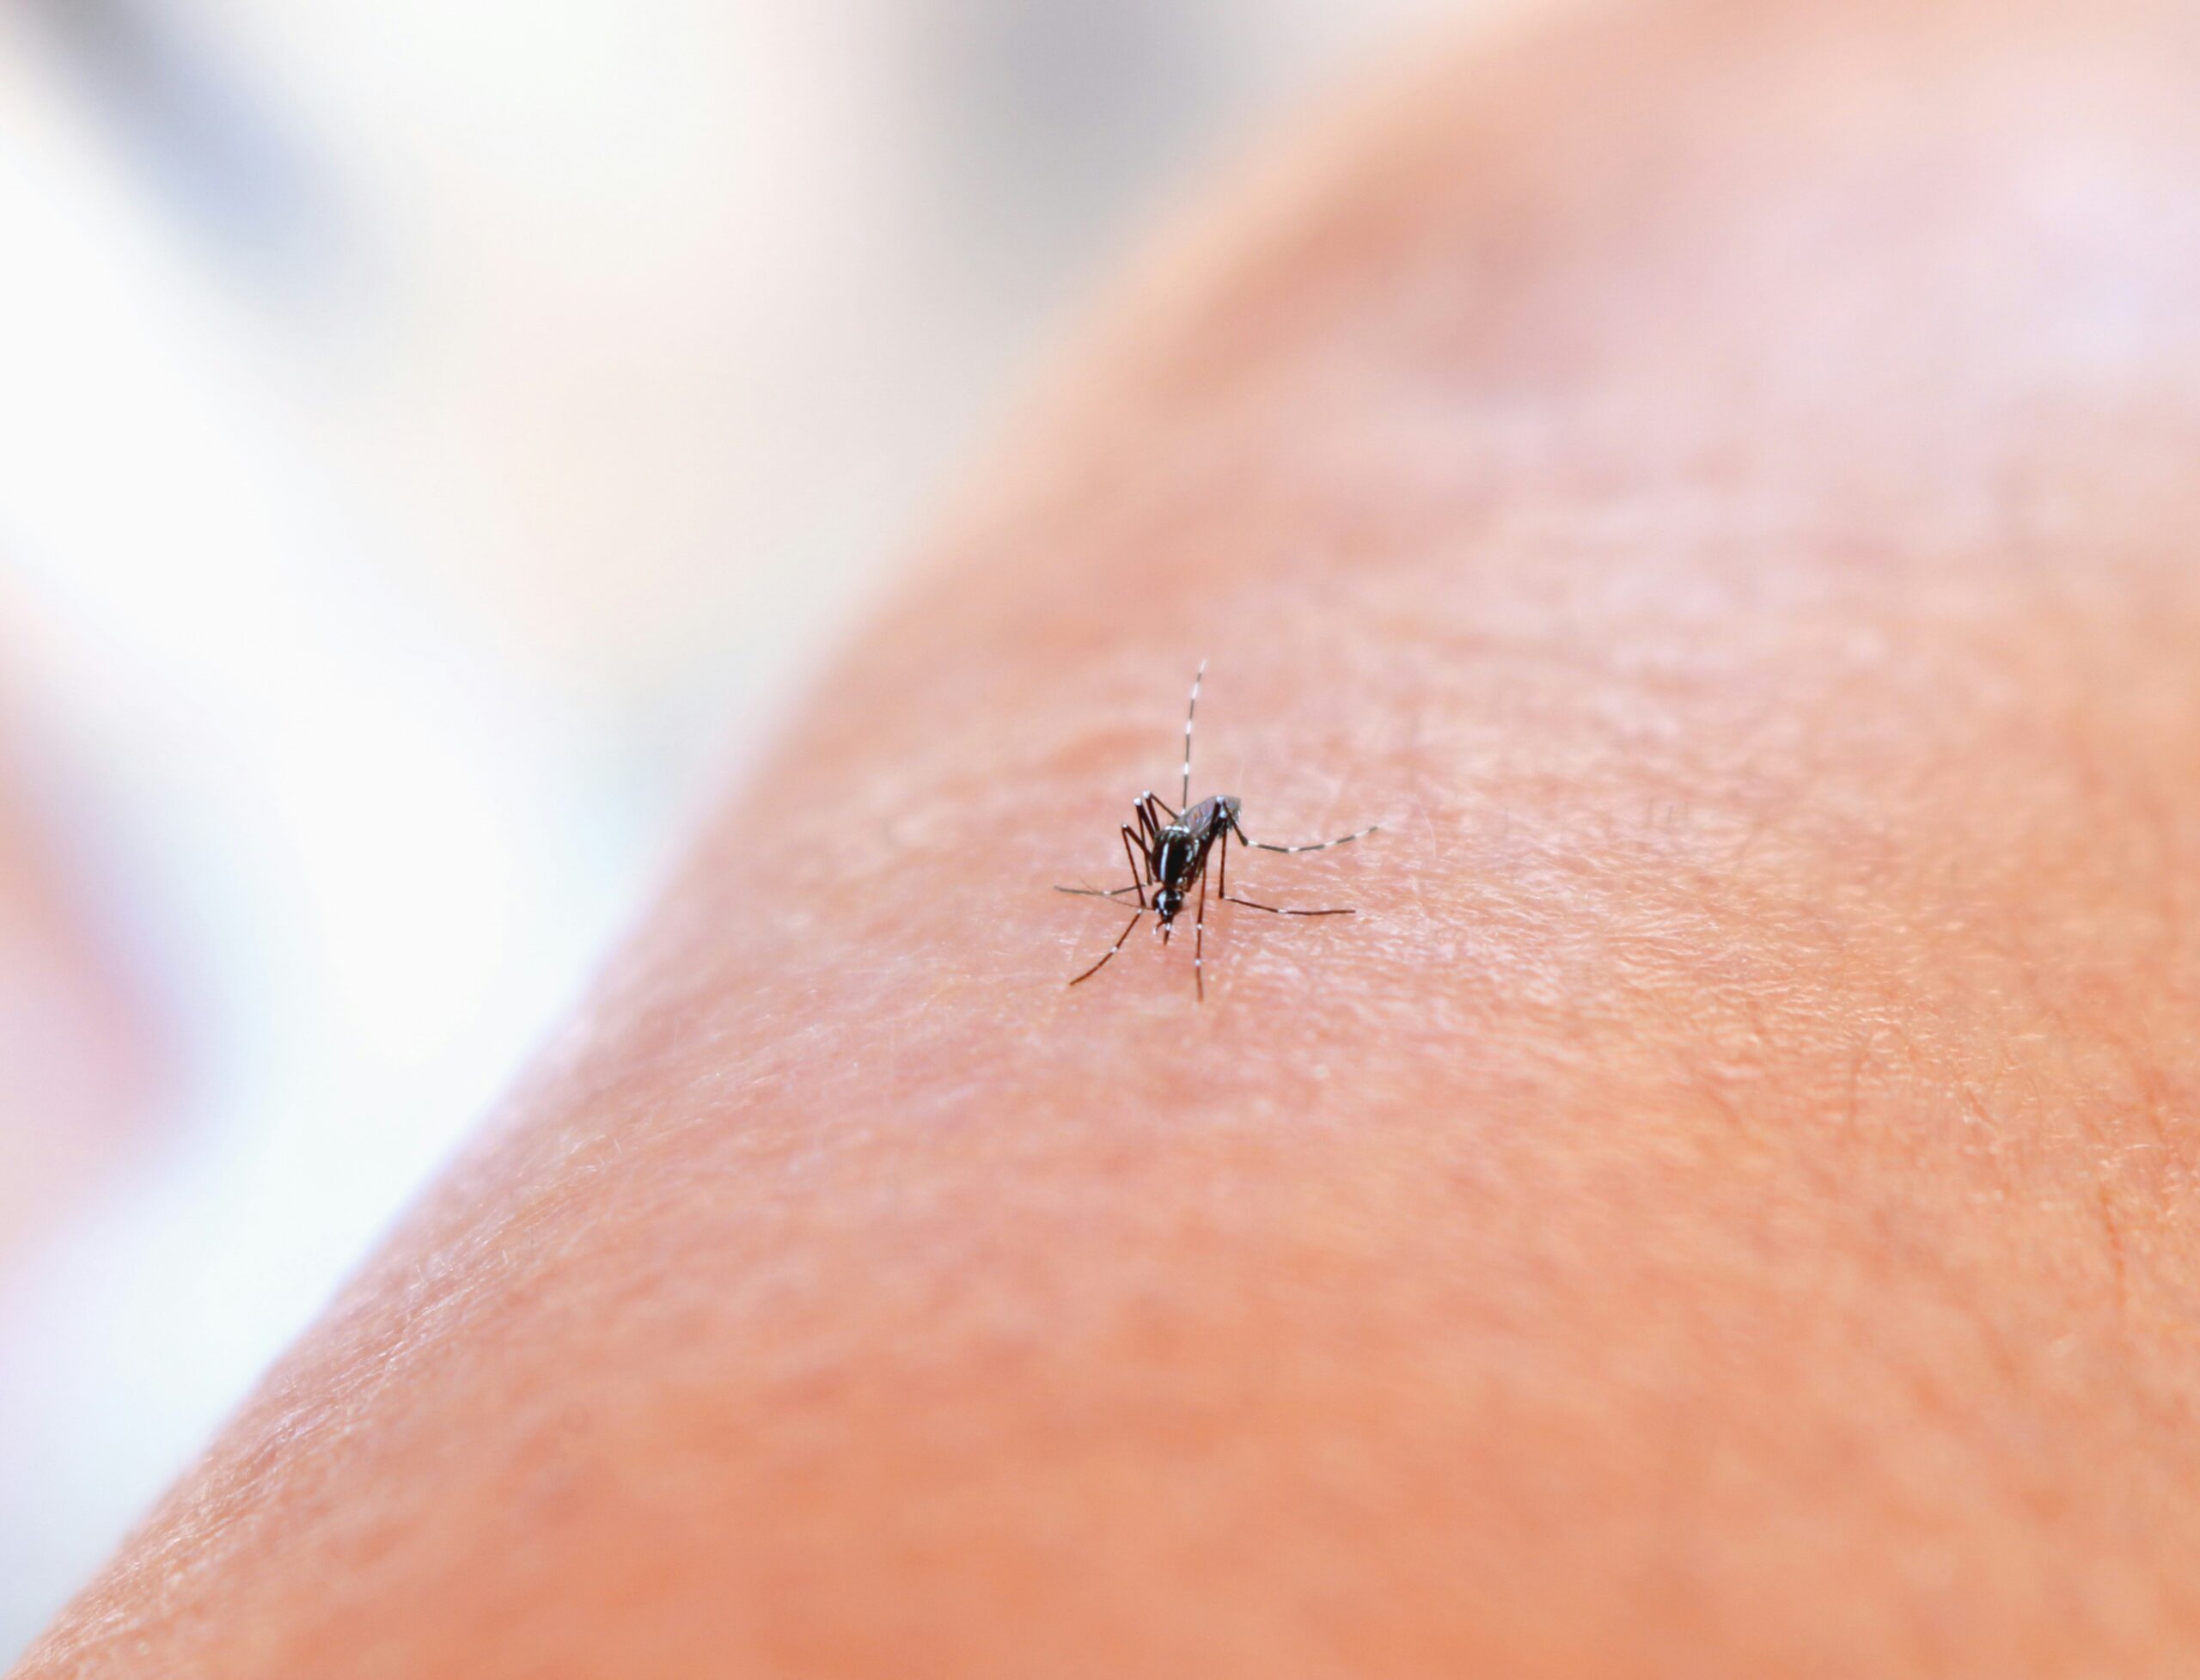 a close up of a mosquito on a person's arm